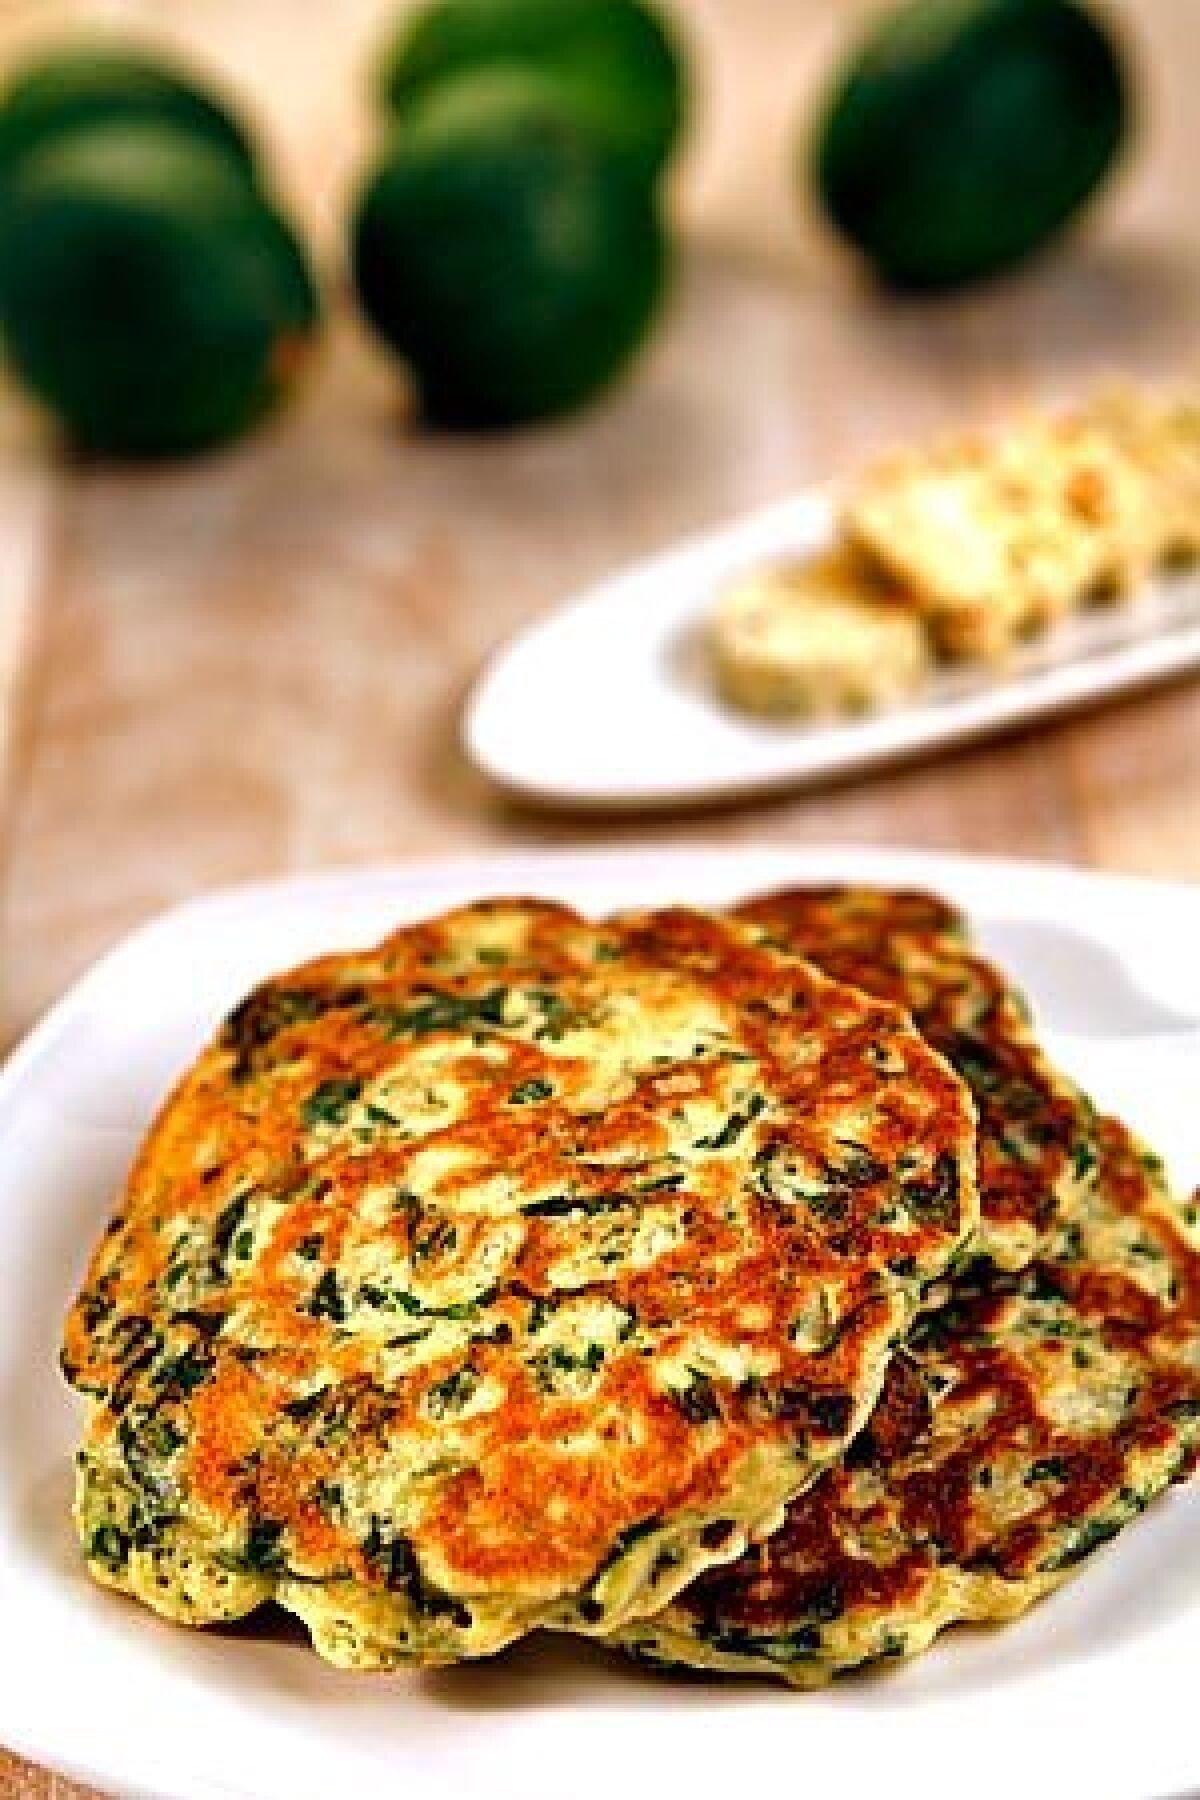 Spinach pancakes from Yotam Ottolenghi.